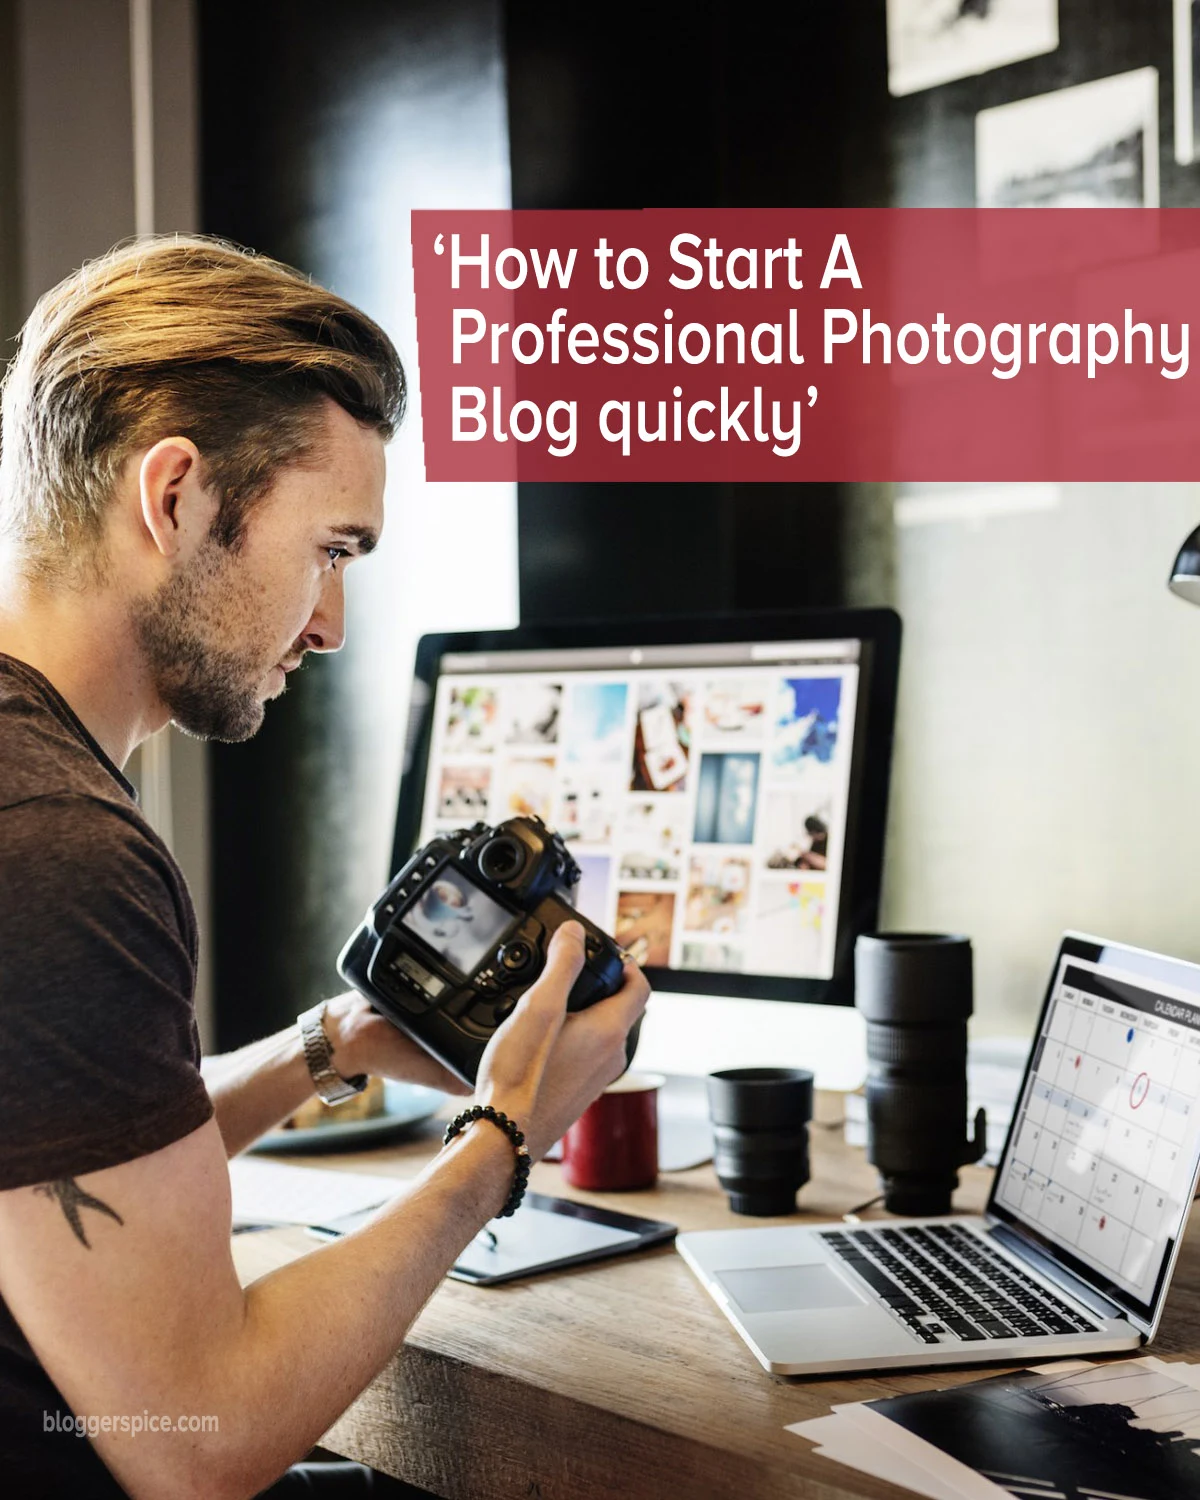 How to Start a Professional Photography Blog Quickly?